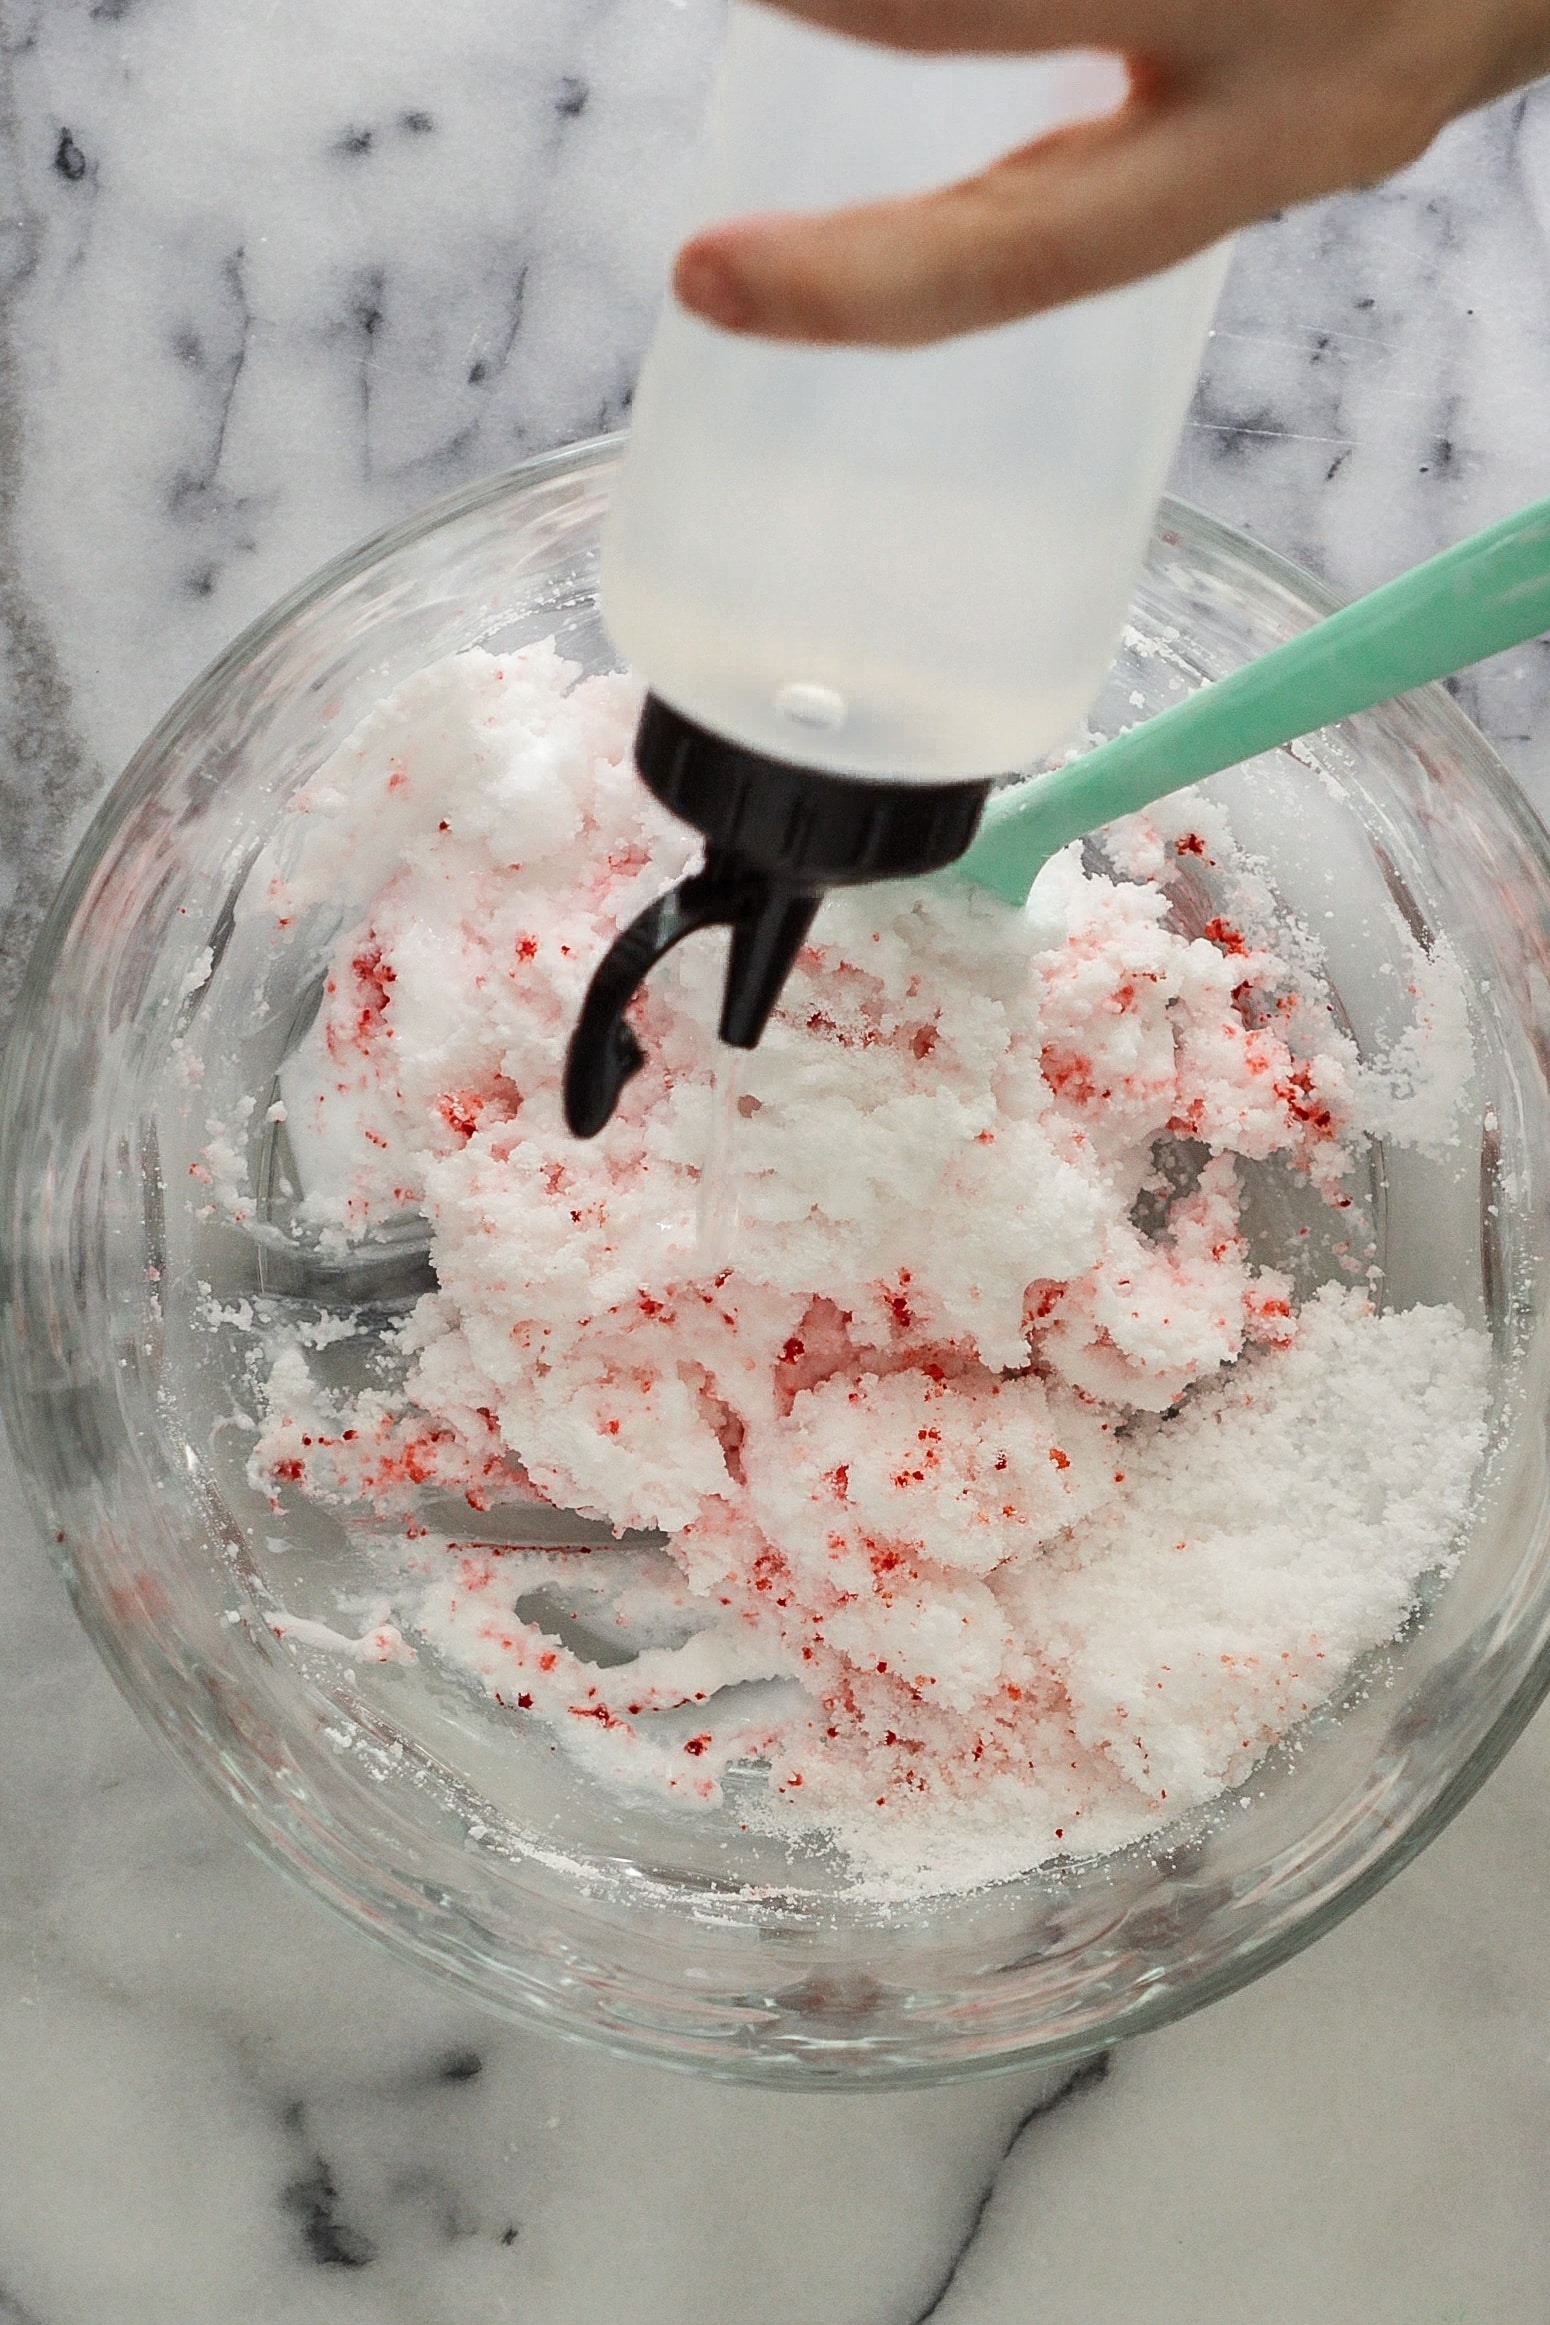 A clear condiment bottle with a black lid is filled with clear liquid slime activator and being squirted into a glass bowl of chunky slightly mixed slime ingredients.